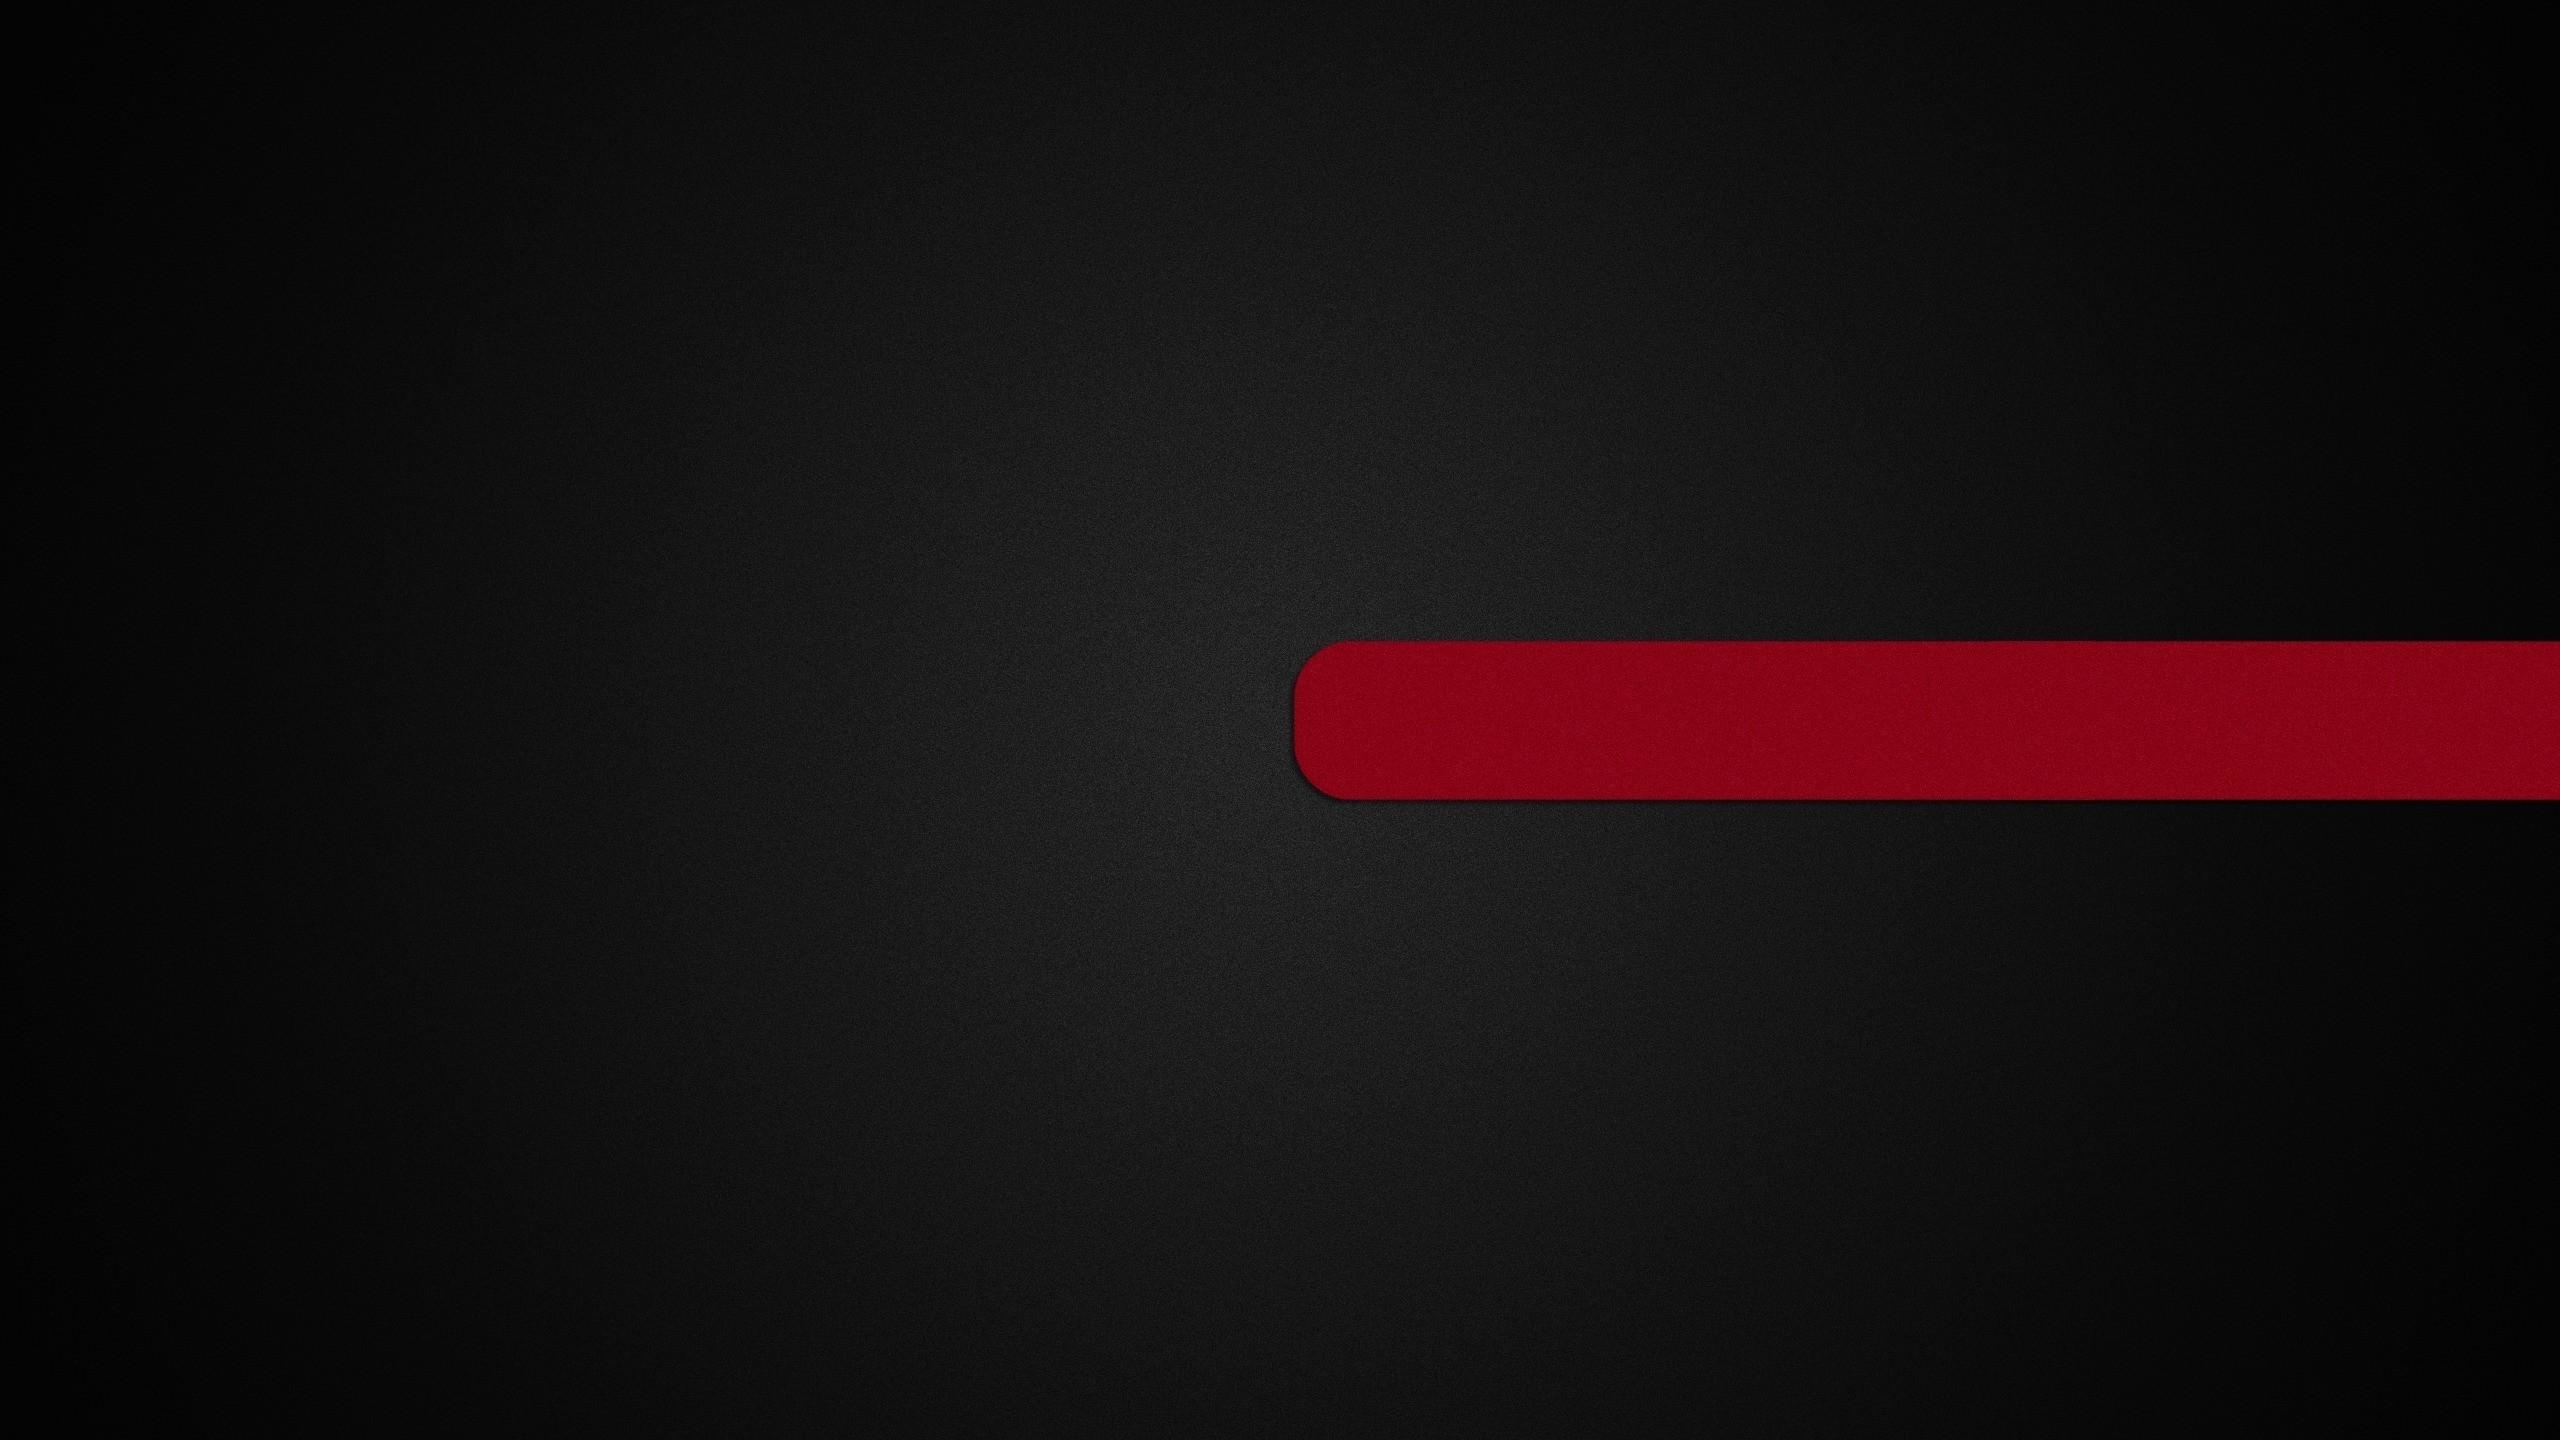 Black And Red Line FREE HD WALLPAPERS